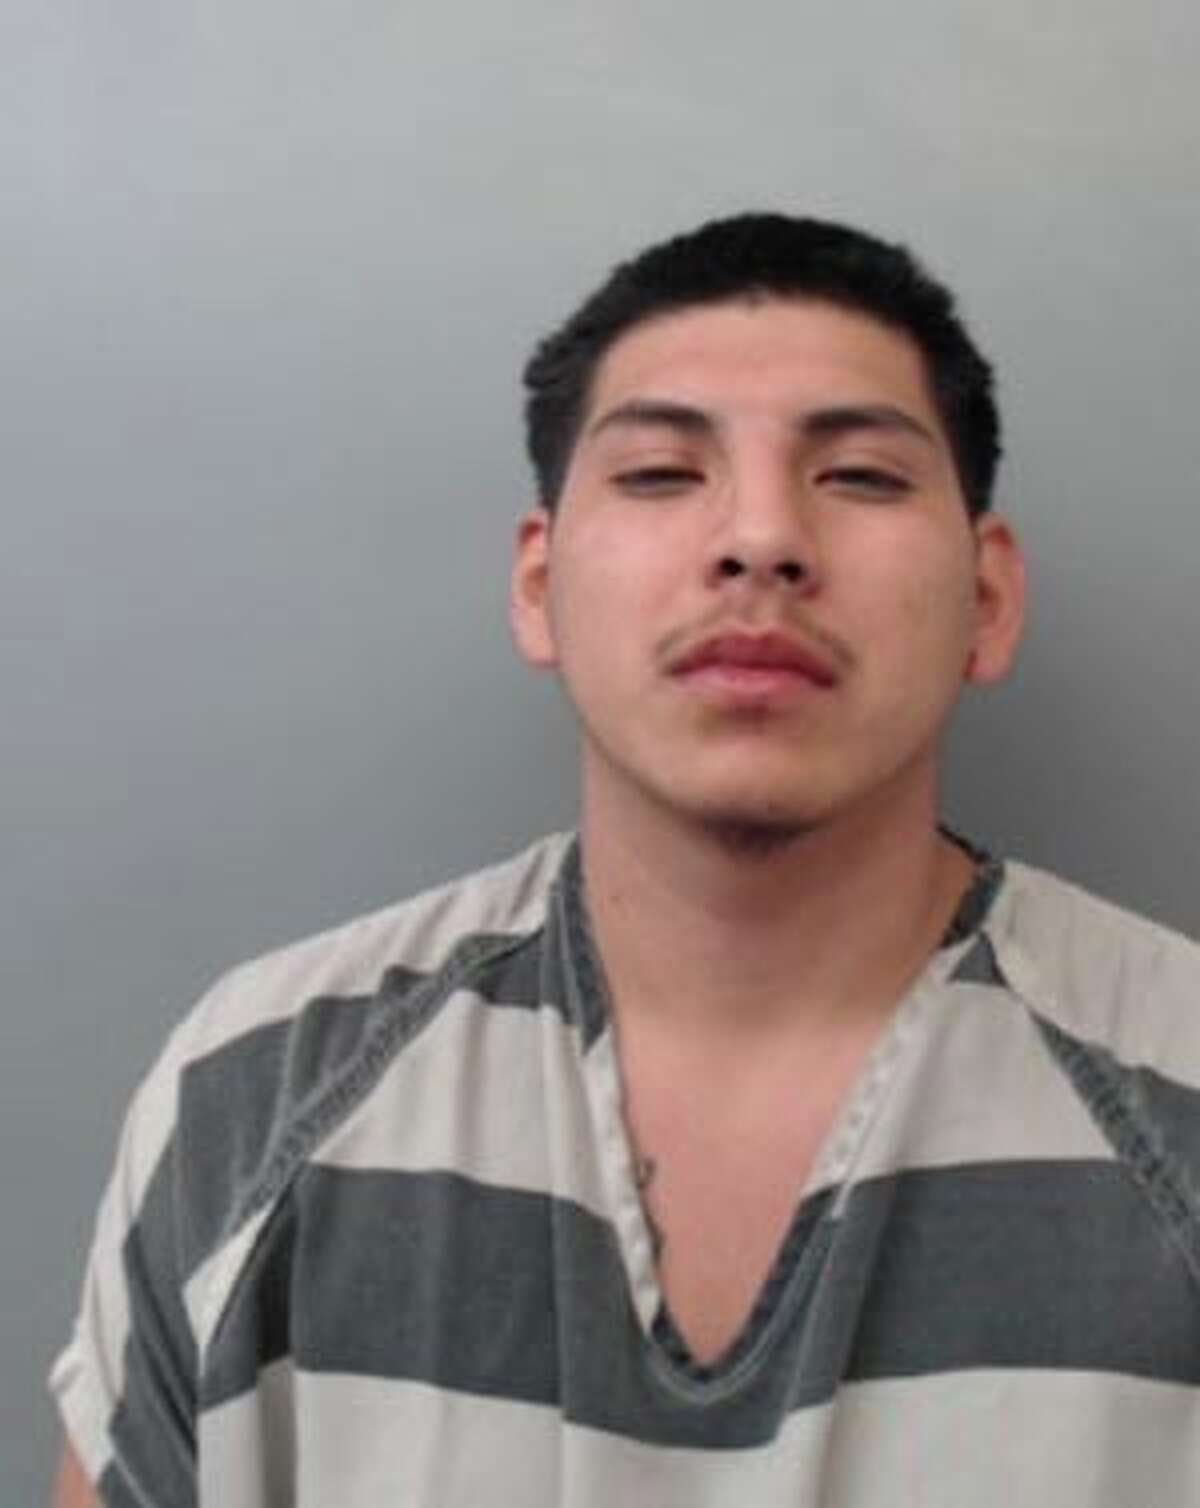 Raul Rios, 18, was charged with intoxication assault with a vehicle.